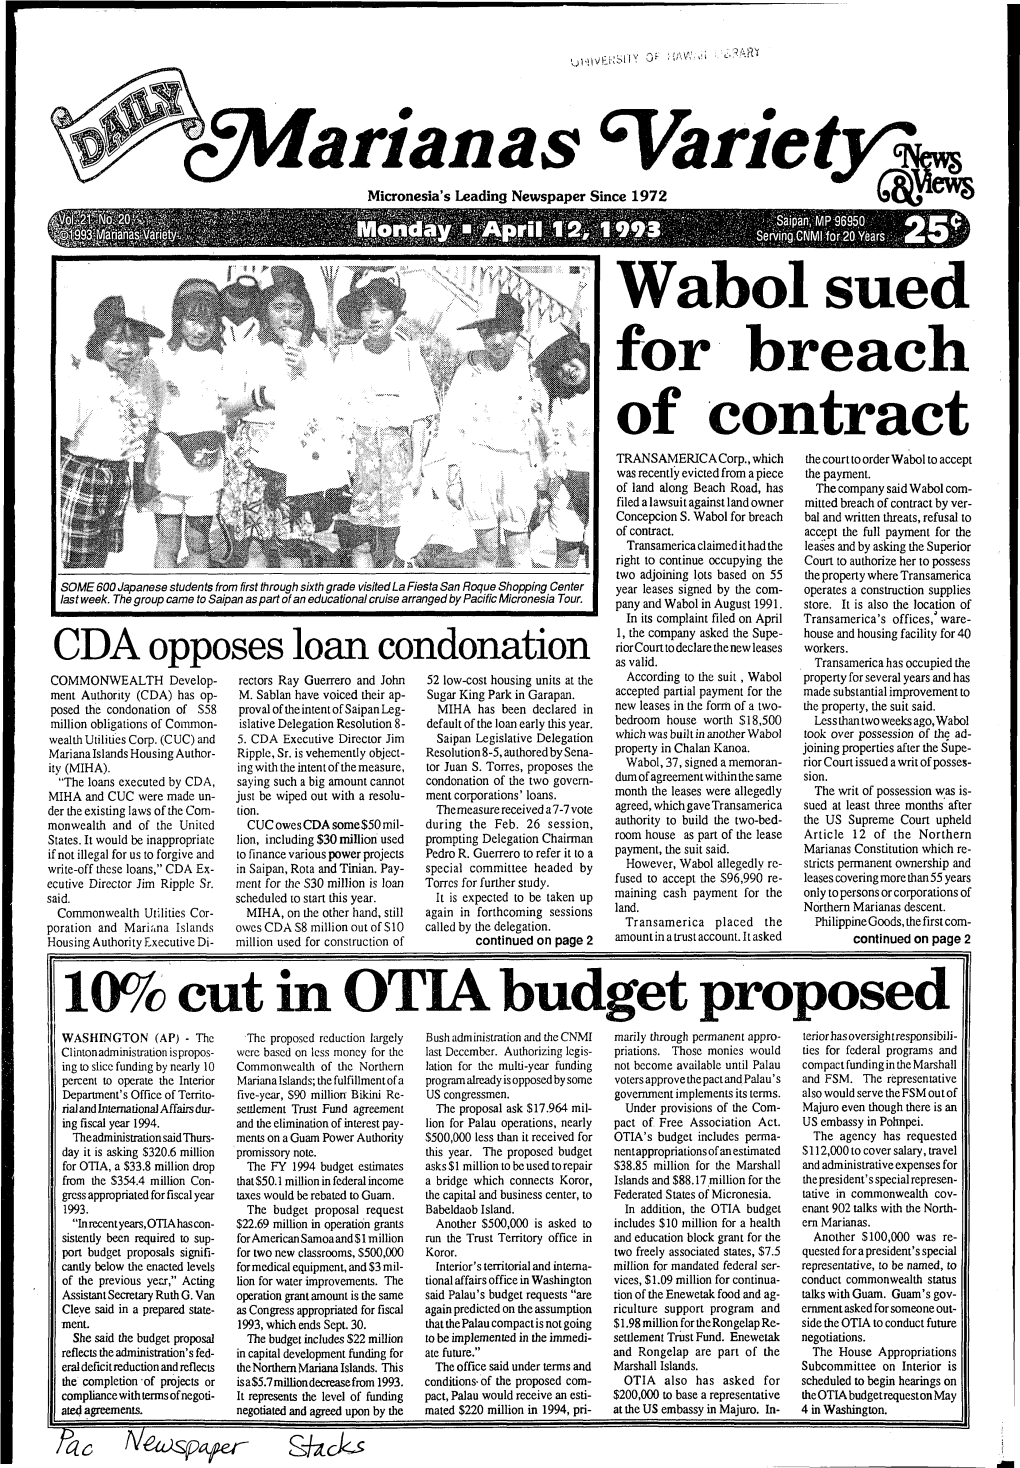 W Abol Sued for Breach of Contract CDA Opposes Loan Condonation 10